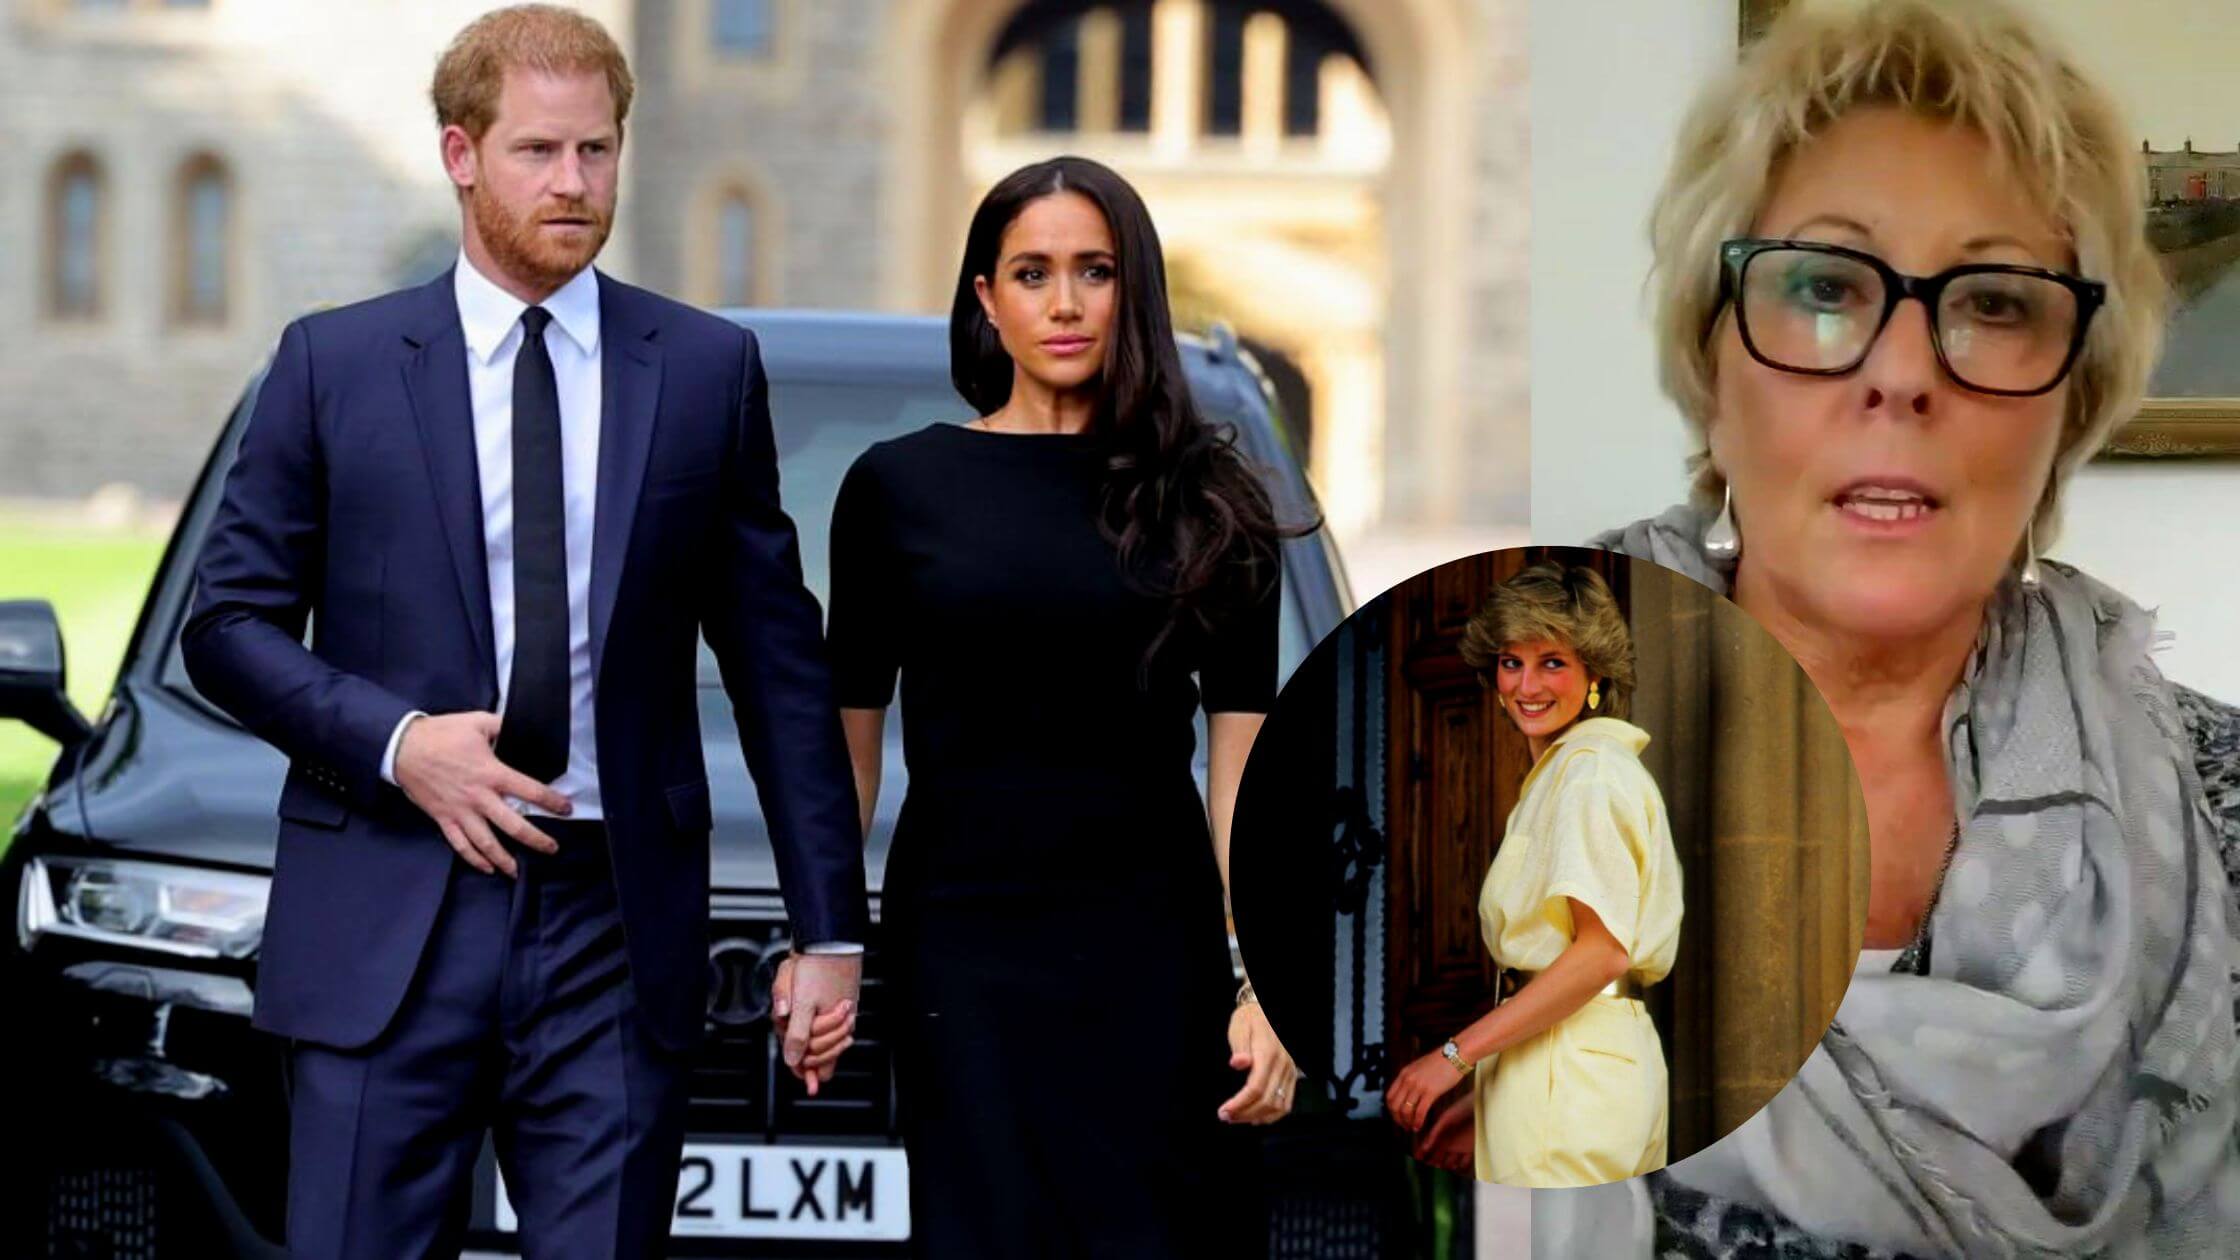 GB News Causes A Stir As Expert Says Meghan And Harry ‘Milking Diana’s Legacy’